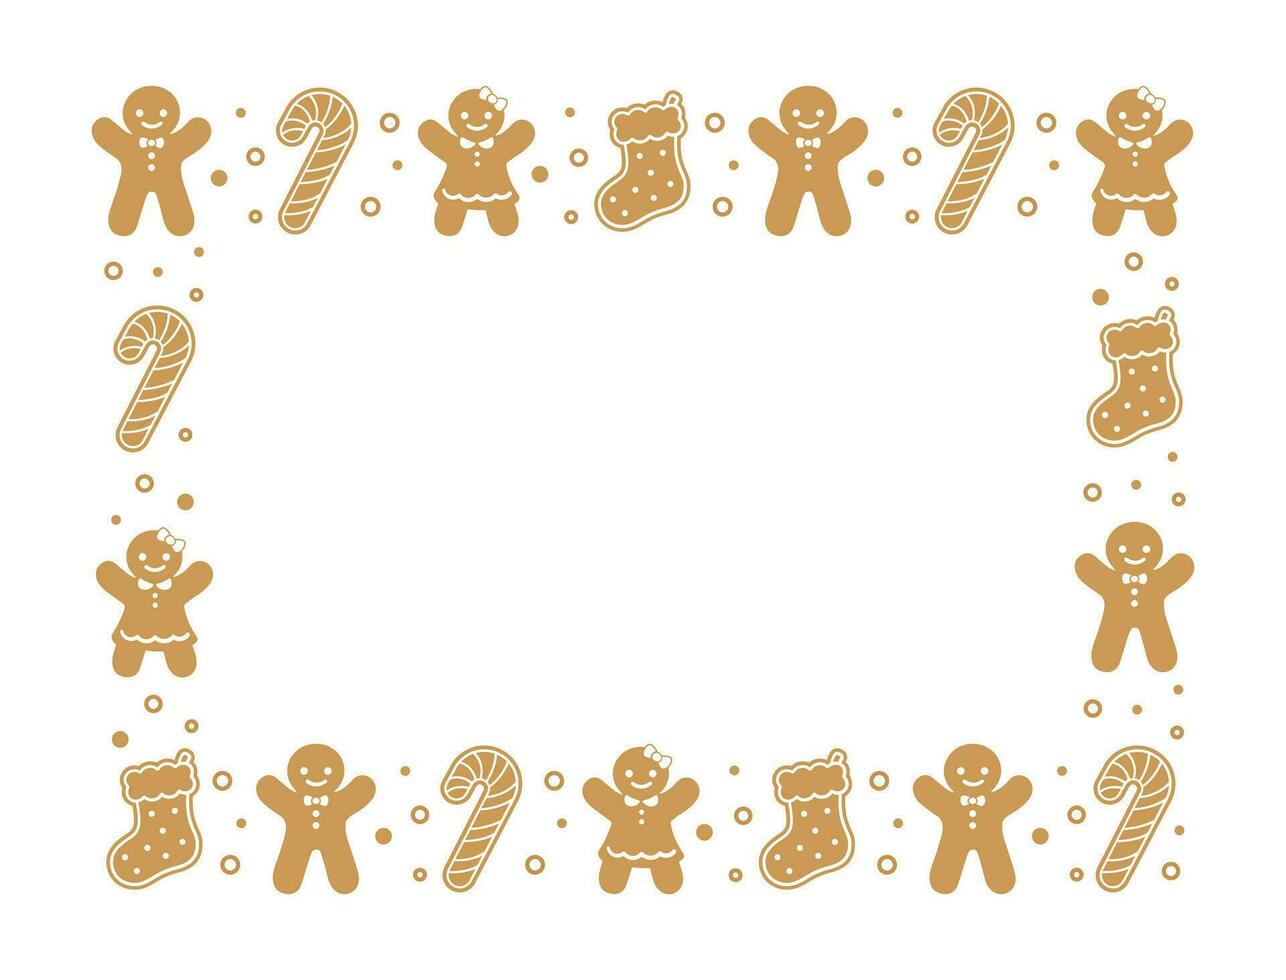 Rectangle Gingerbread Cookies Frame Border, Christmas Winter Holiday Graphics. Homemade sweets pattern, card and social media post template on white background. Isolated vector illustration.